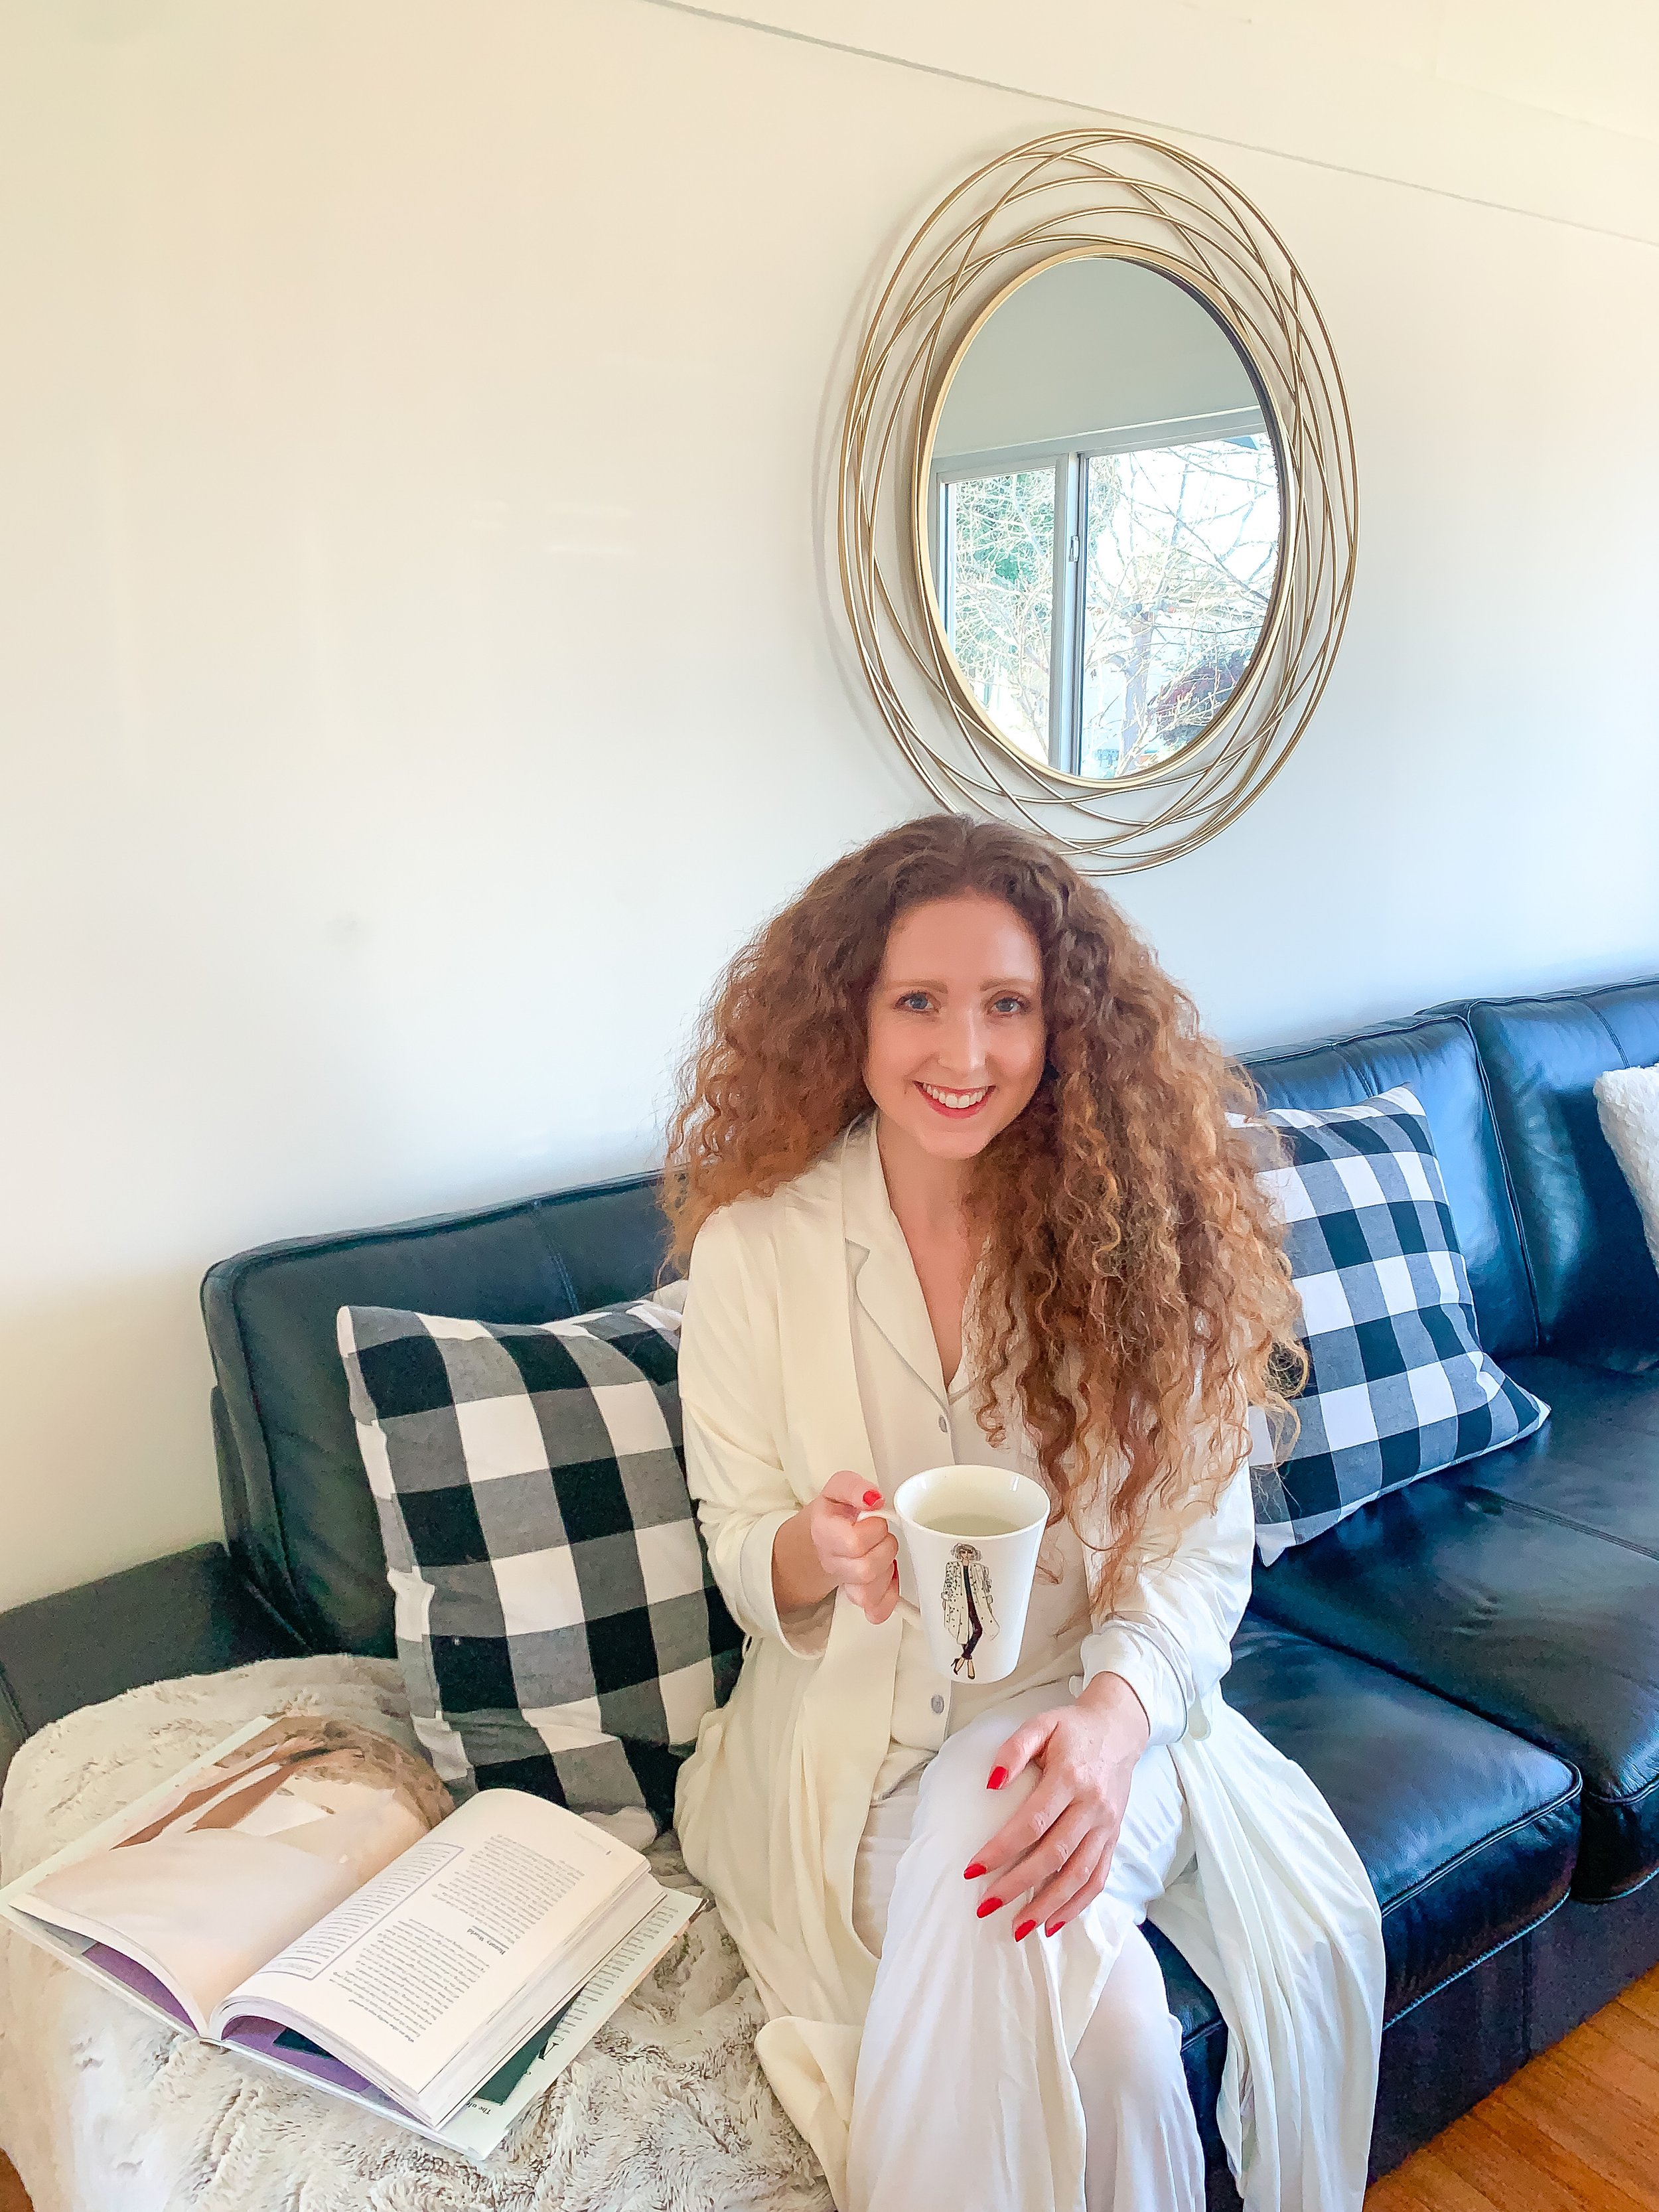 If you are looking for a Cozy Earth pajamas sale, then you found one! Use my Cozy Earth promo code CE-LORNA to get 40% off your Cozy Earth bamboo pajamas. You will not find a better Cozy Earth pajamas sale as this is the largest discount Cozy Earth i